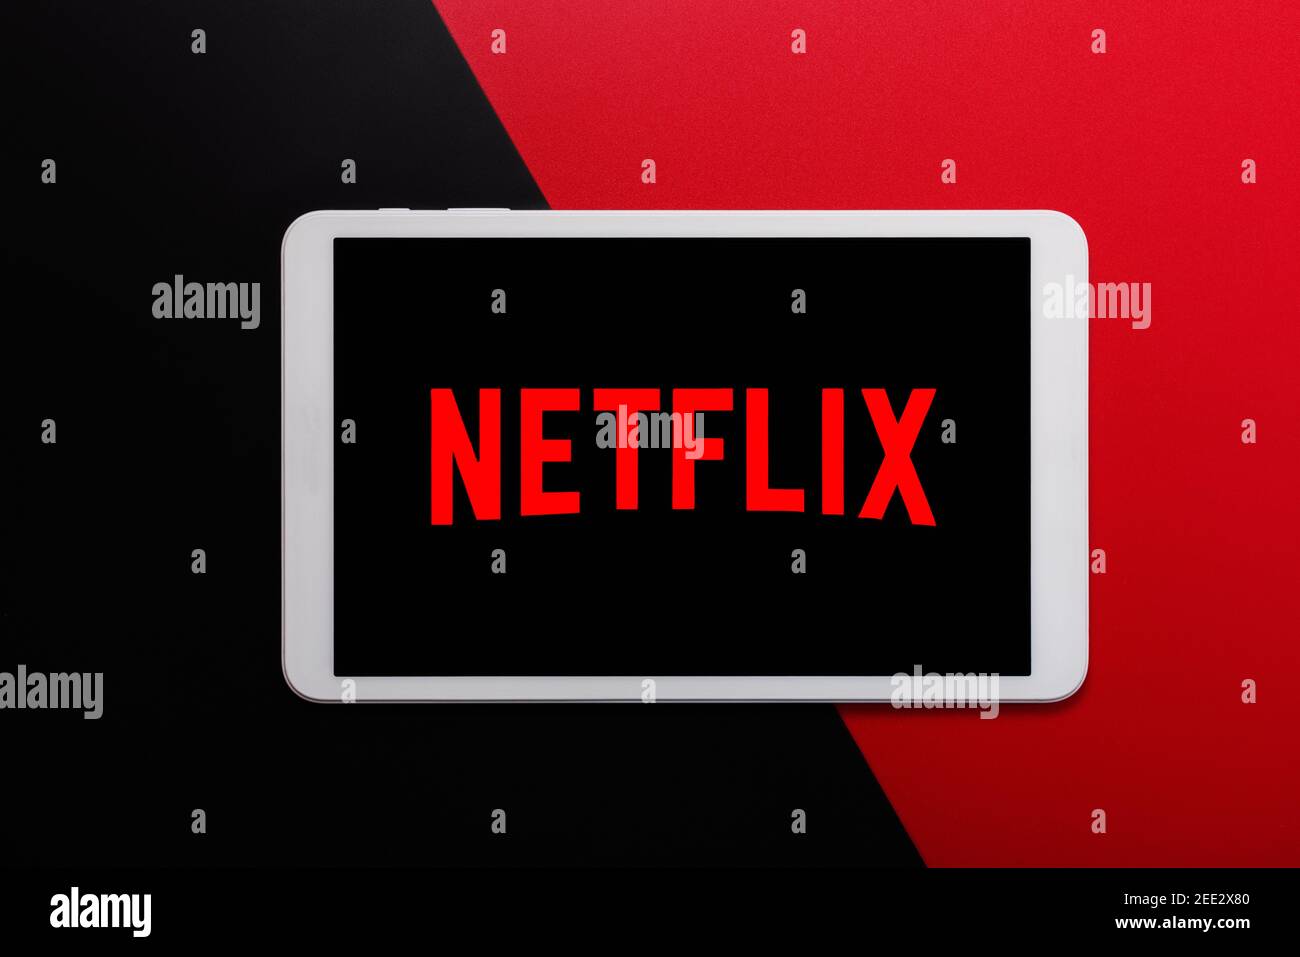 Netflix logo on the screen of a white digital tablet on a red and black background Stock Photo